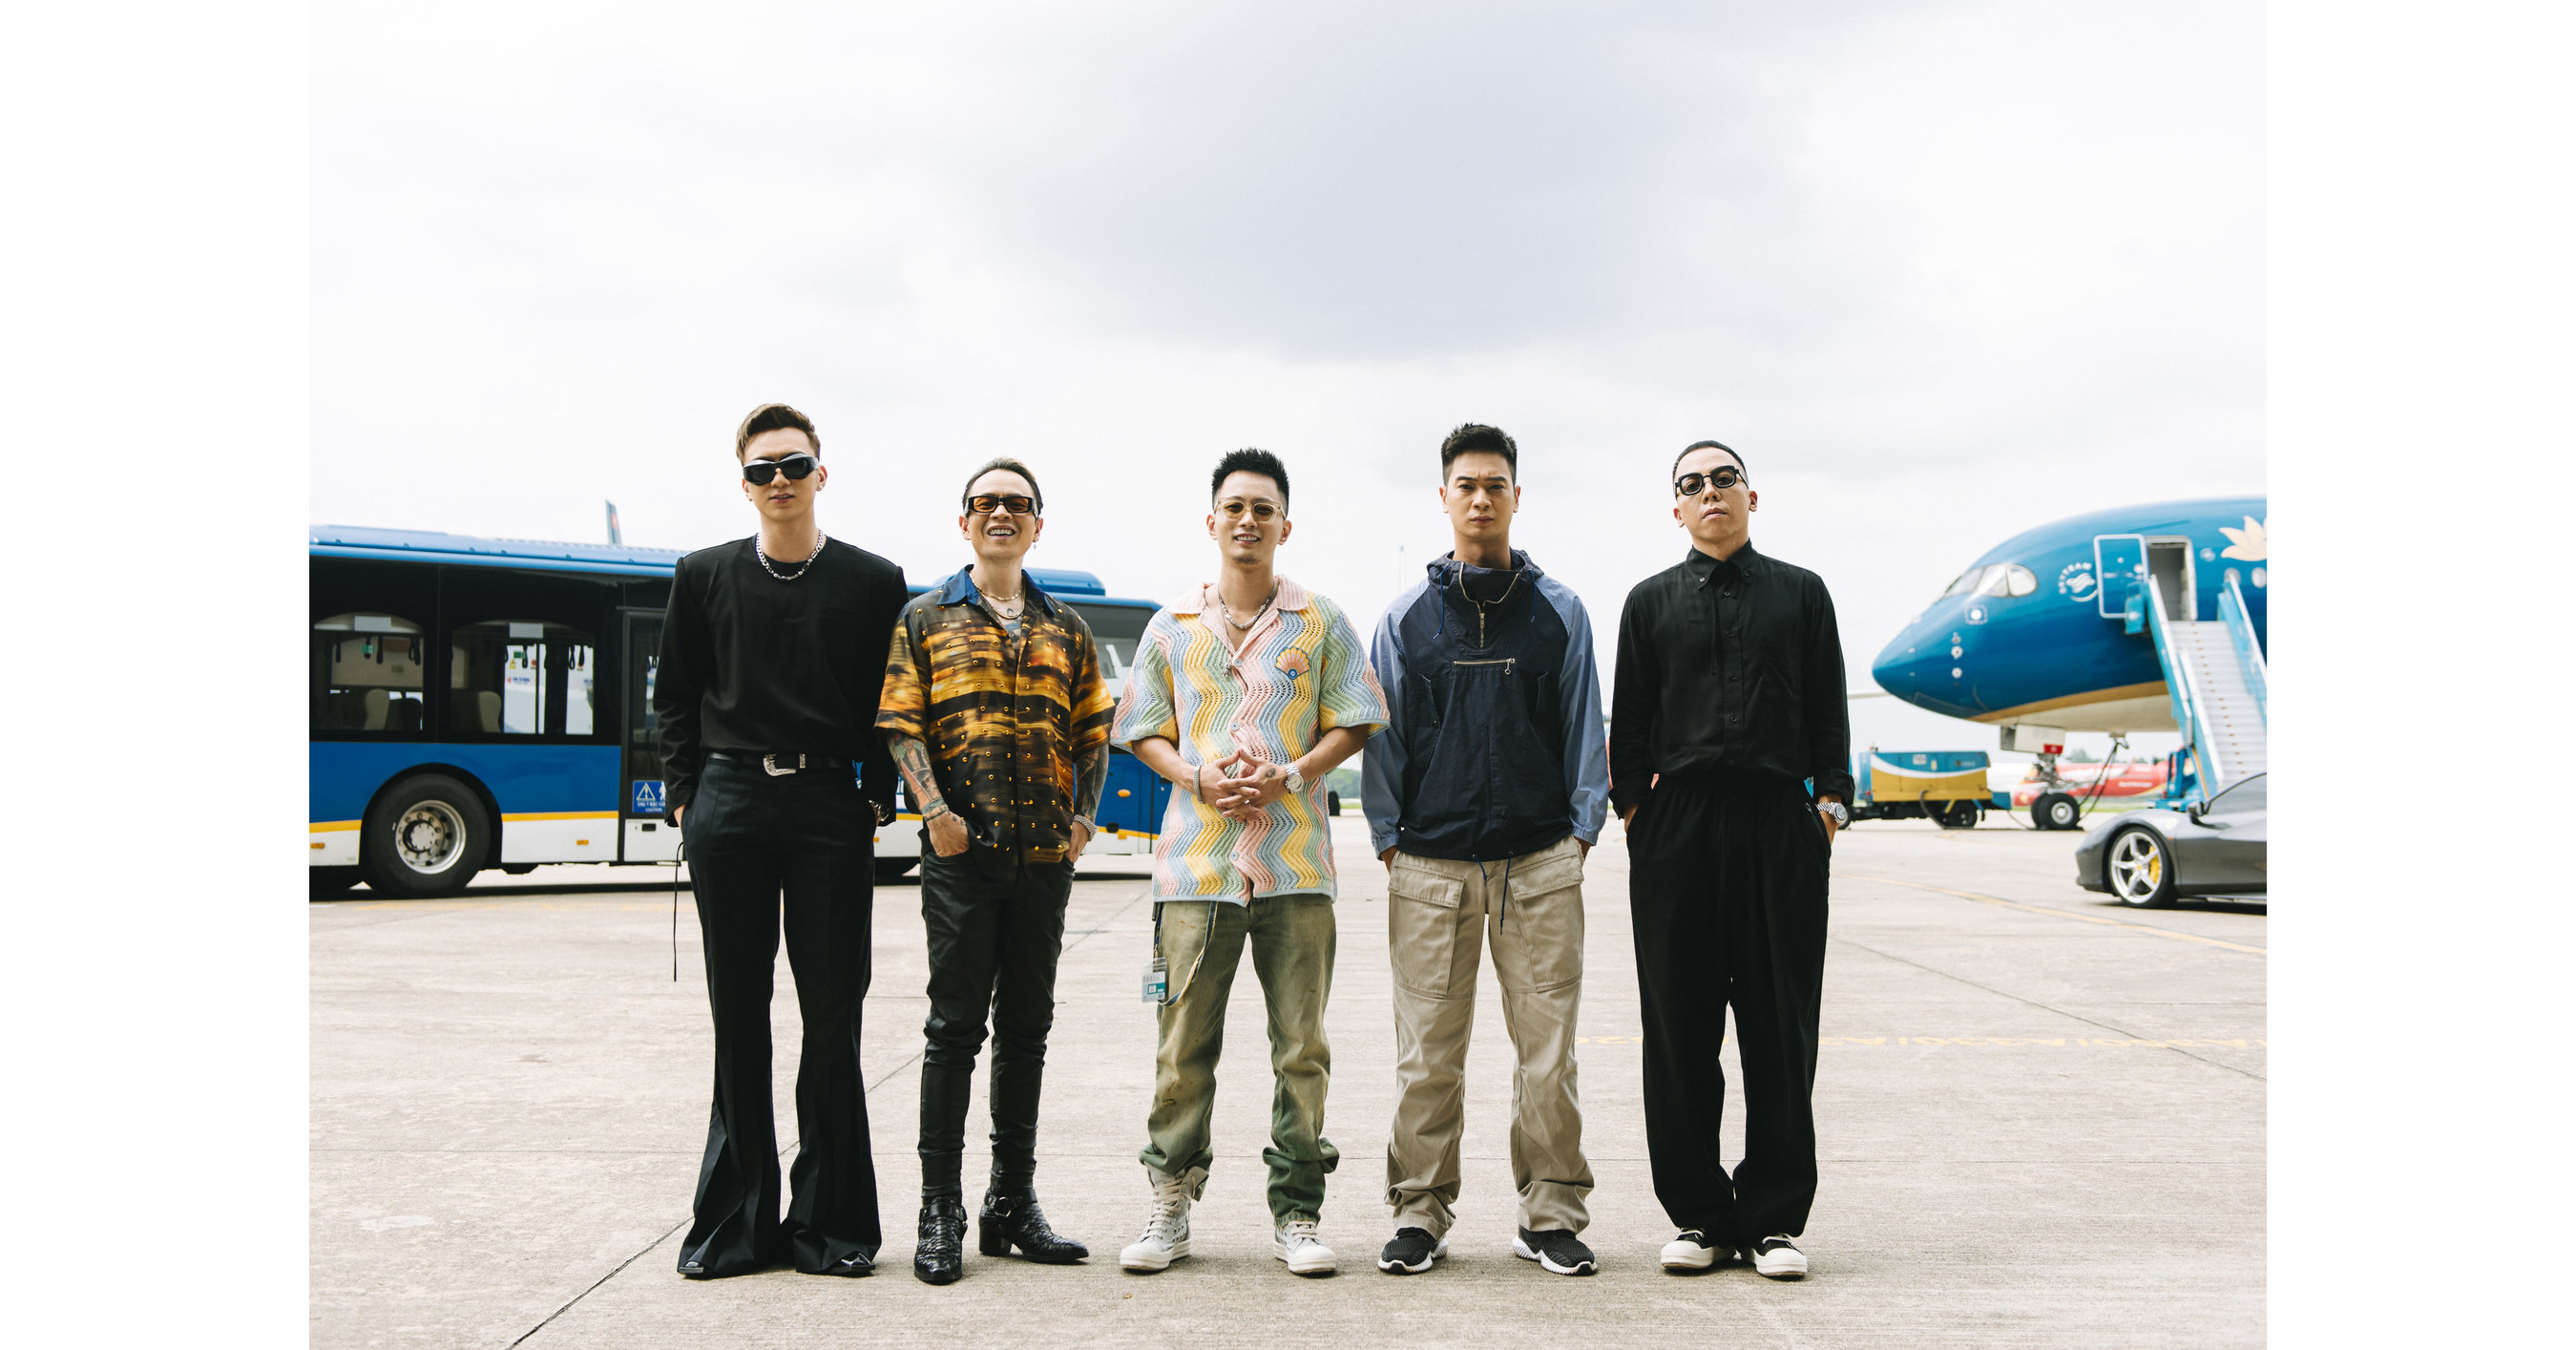 Vietnam Airlines Partners with SpaceSpeakers Group to Release MV “Hurry up!” to Inspire Travel